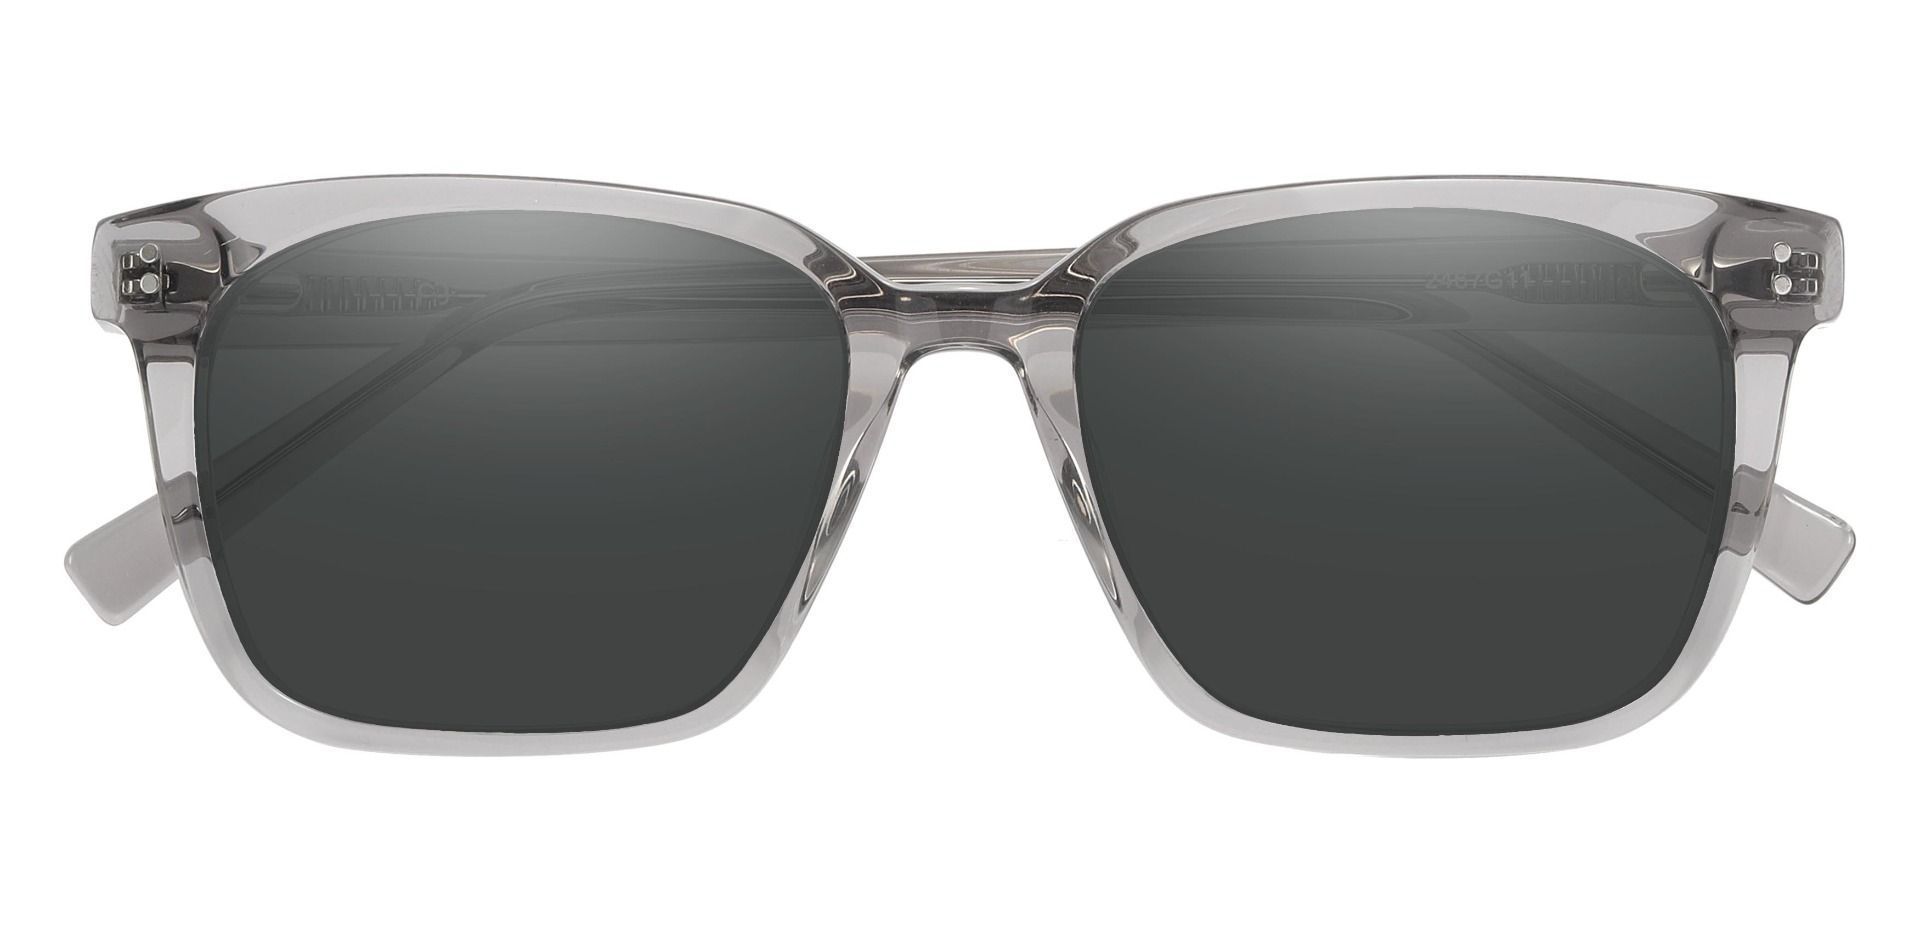 Apex Rectangle Non-Rx Sunglasses - Gray Frame With Gray Lenses